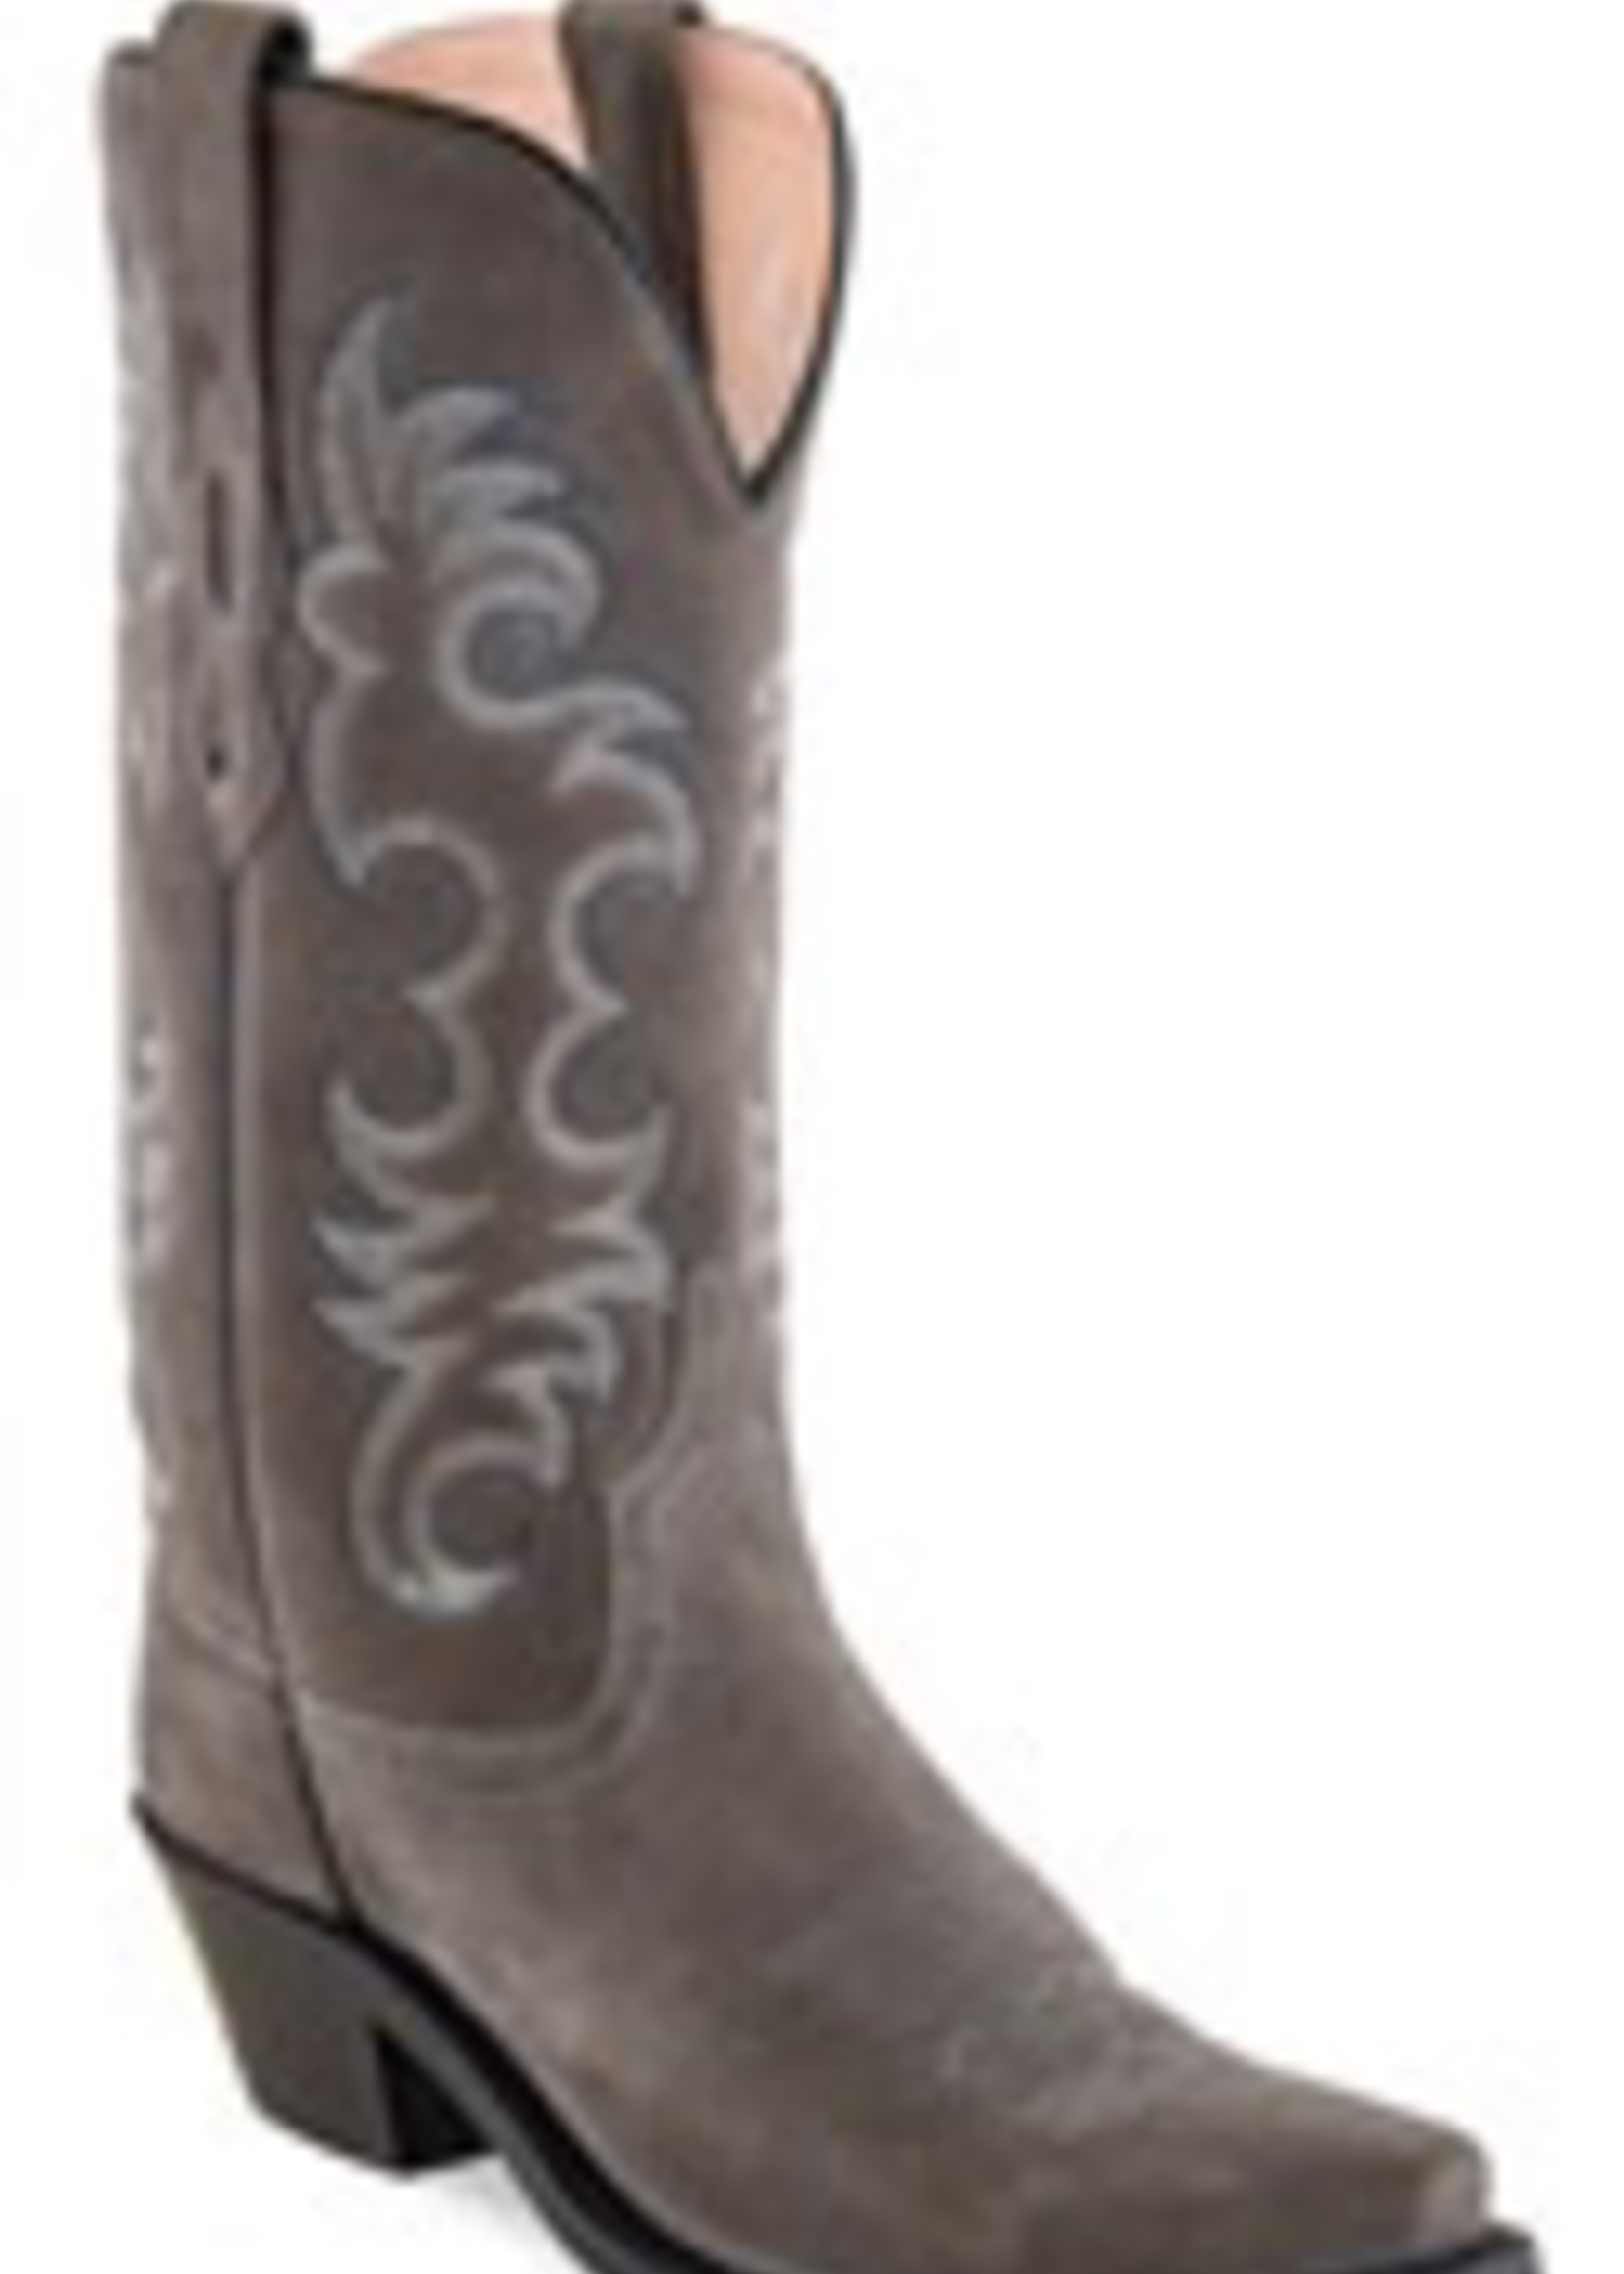 Boots-Women OLD WEST LF1516 Grey Roughout